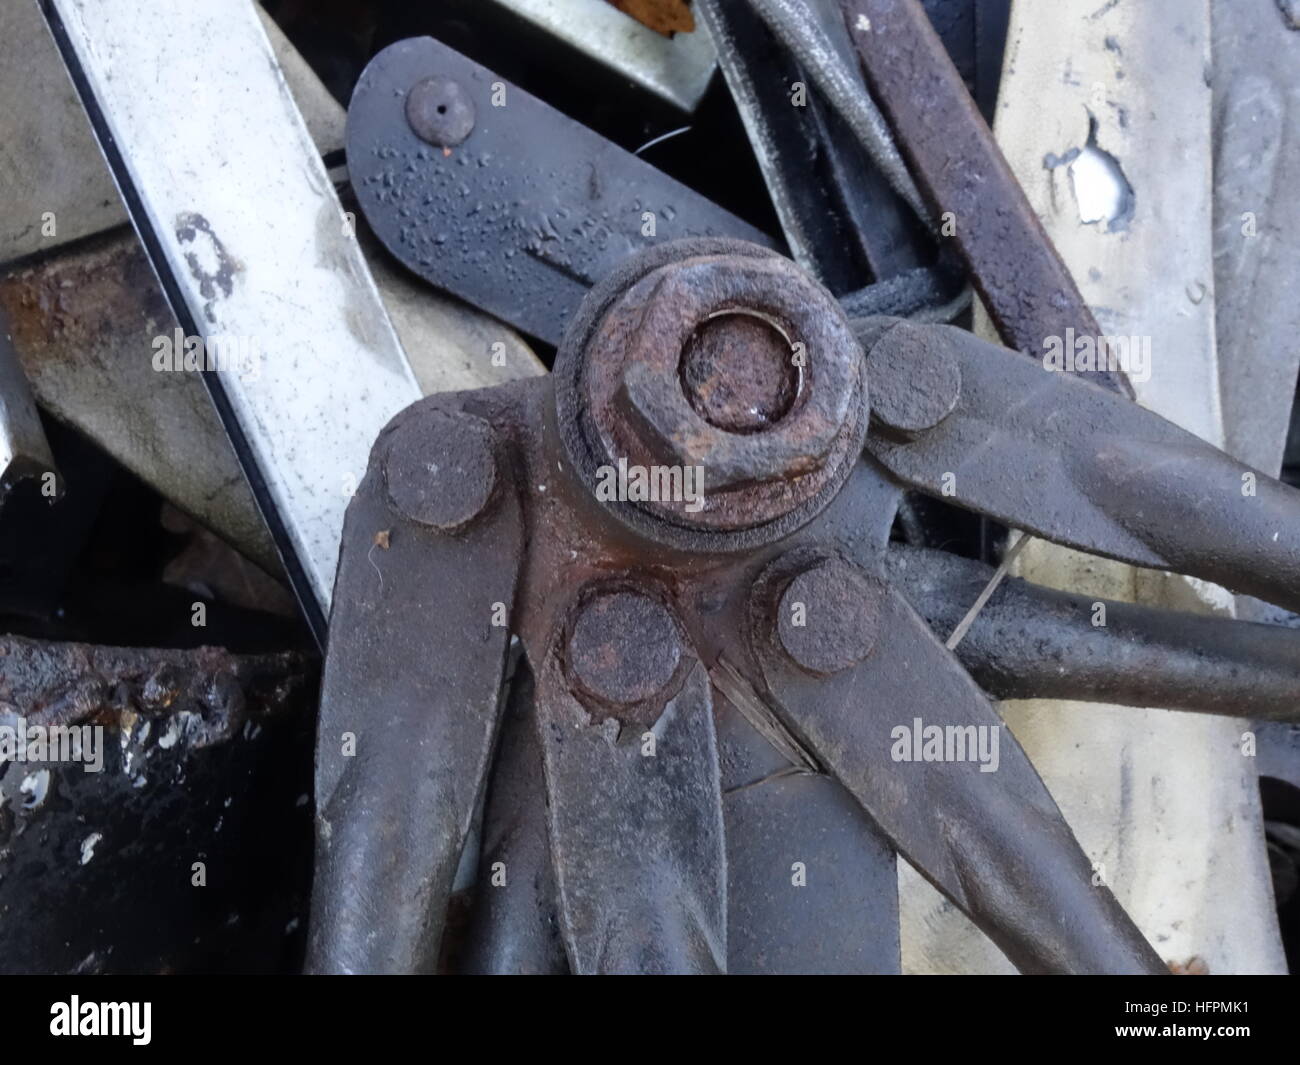 Close up shot of interesting metal components from a scrap heap Stock Photo